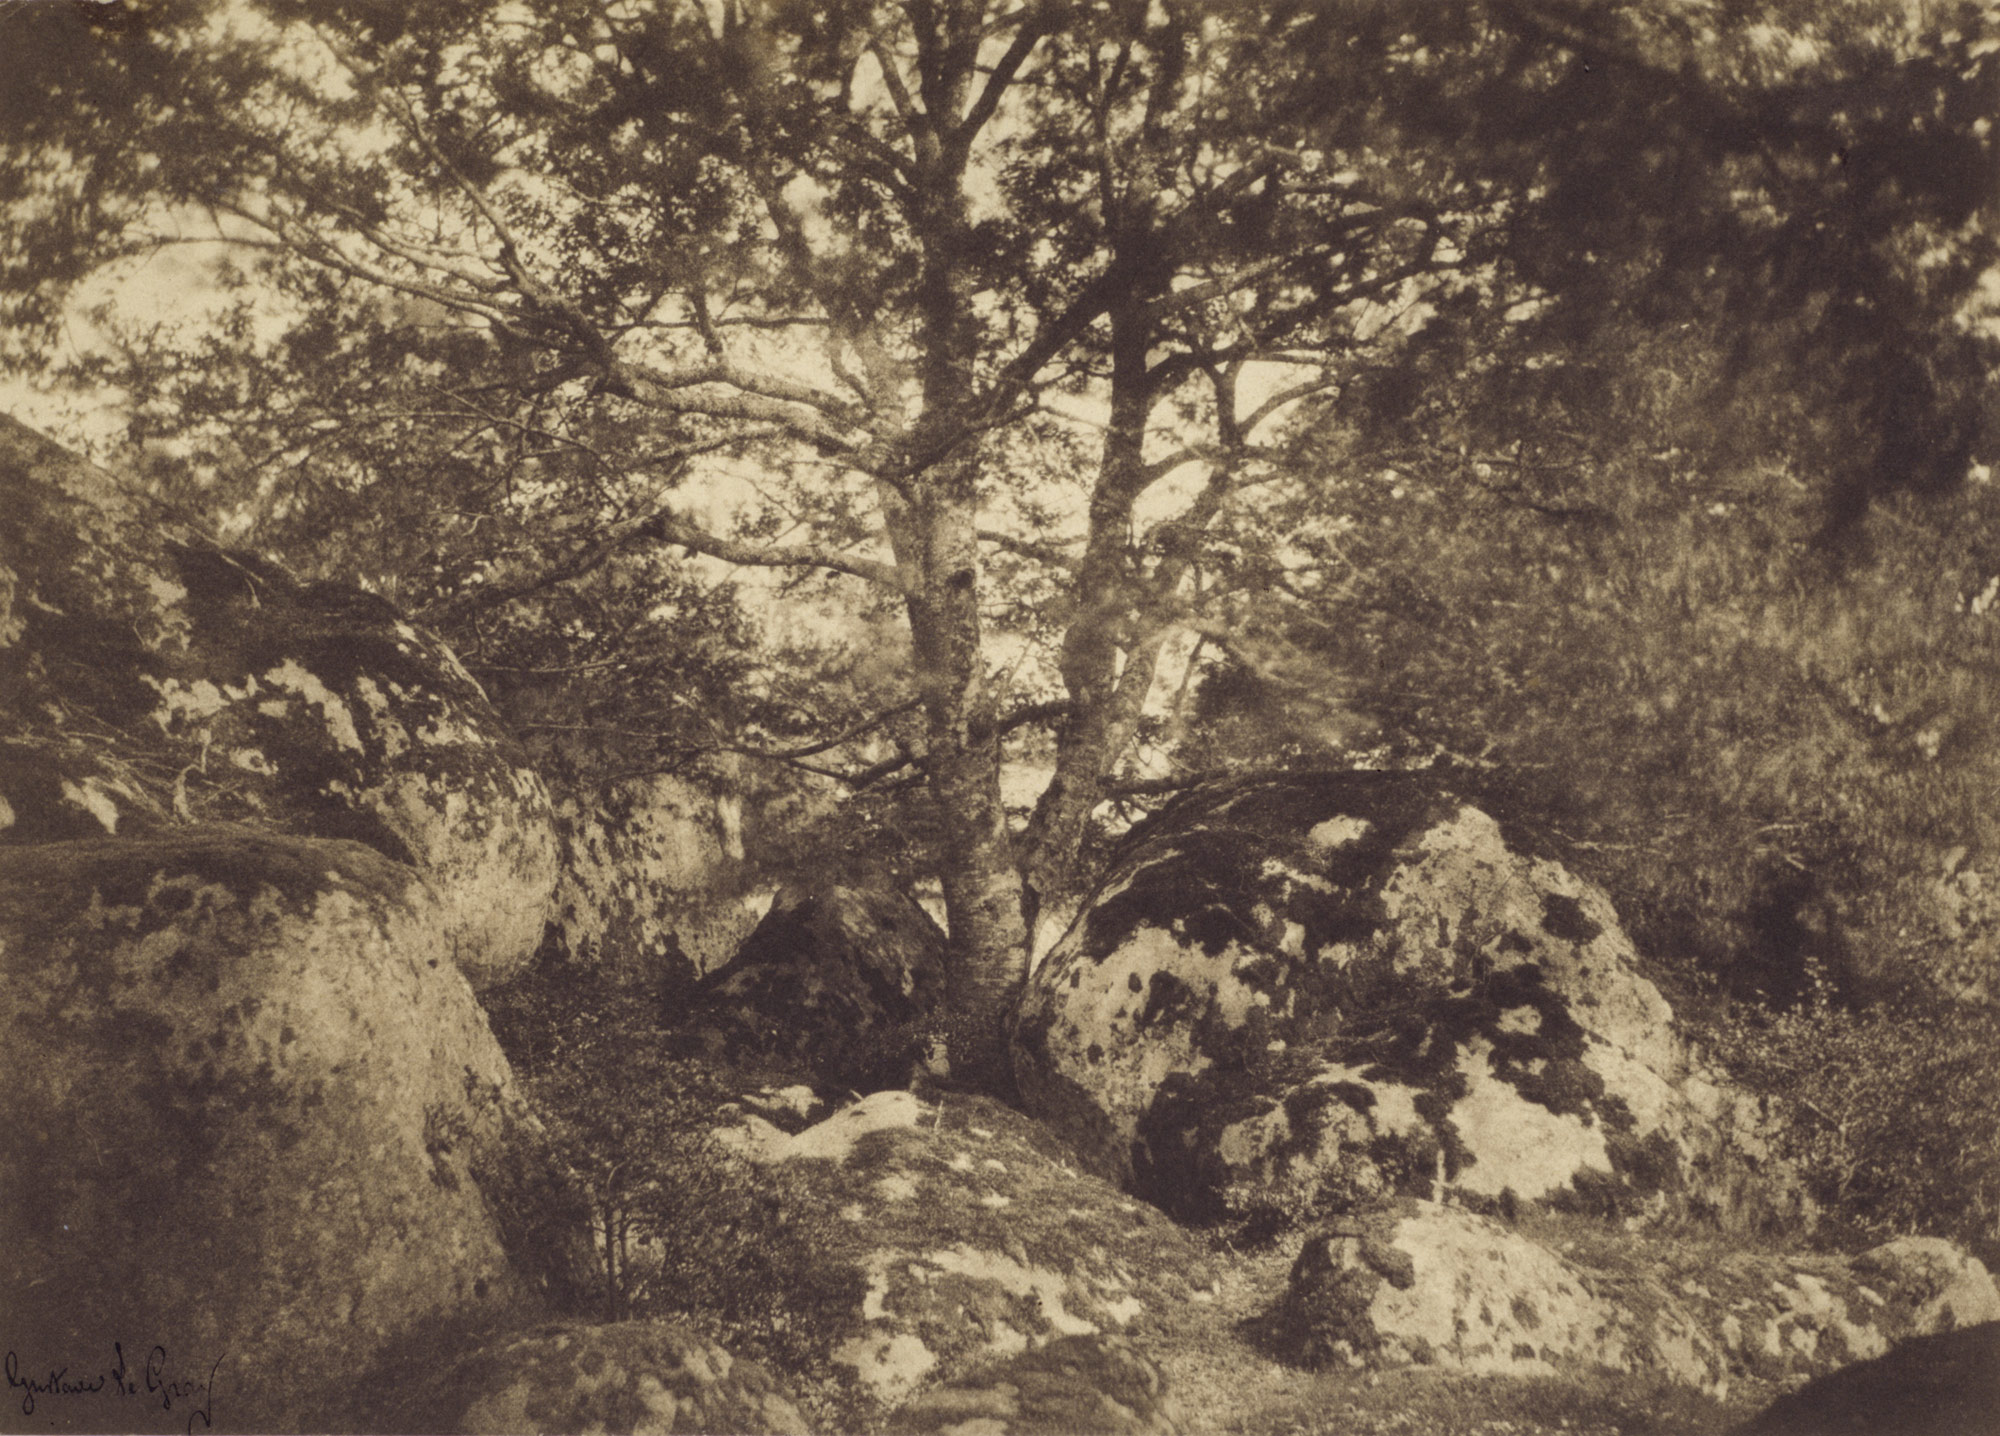 Oak Tree and Rocks, Forest of Fontainebleau] | Gustave Le Gray ...